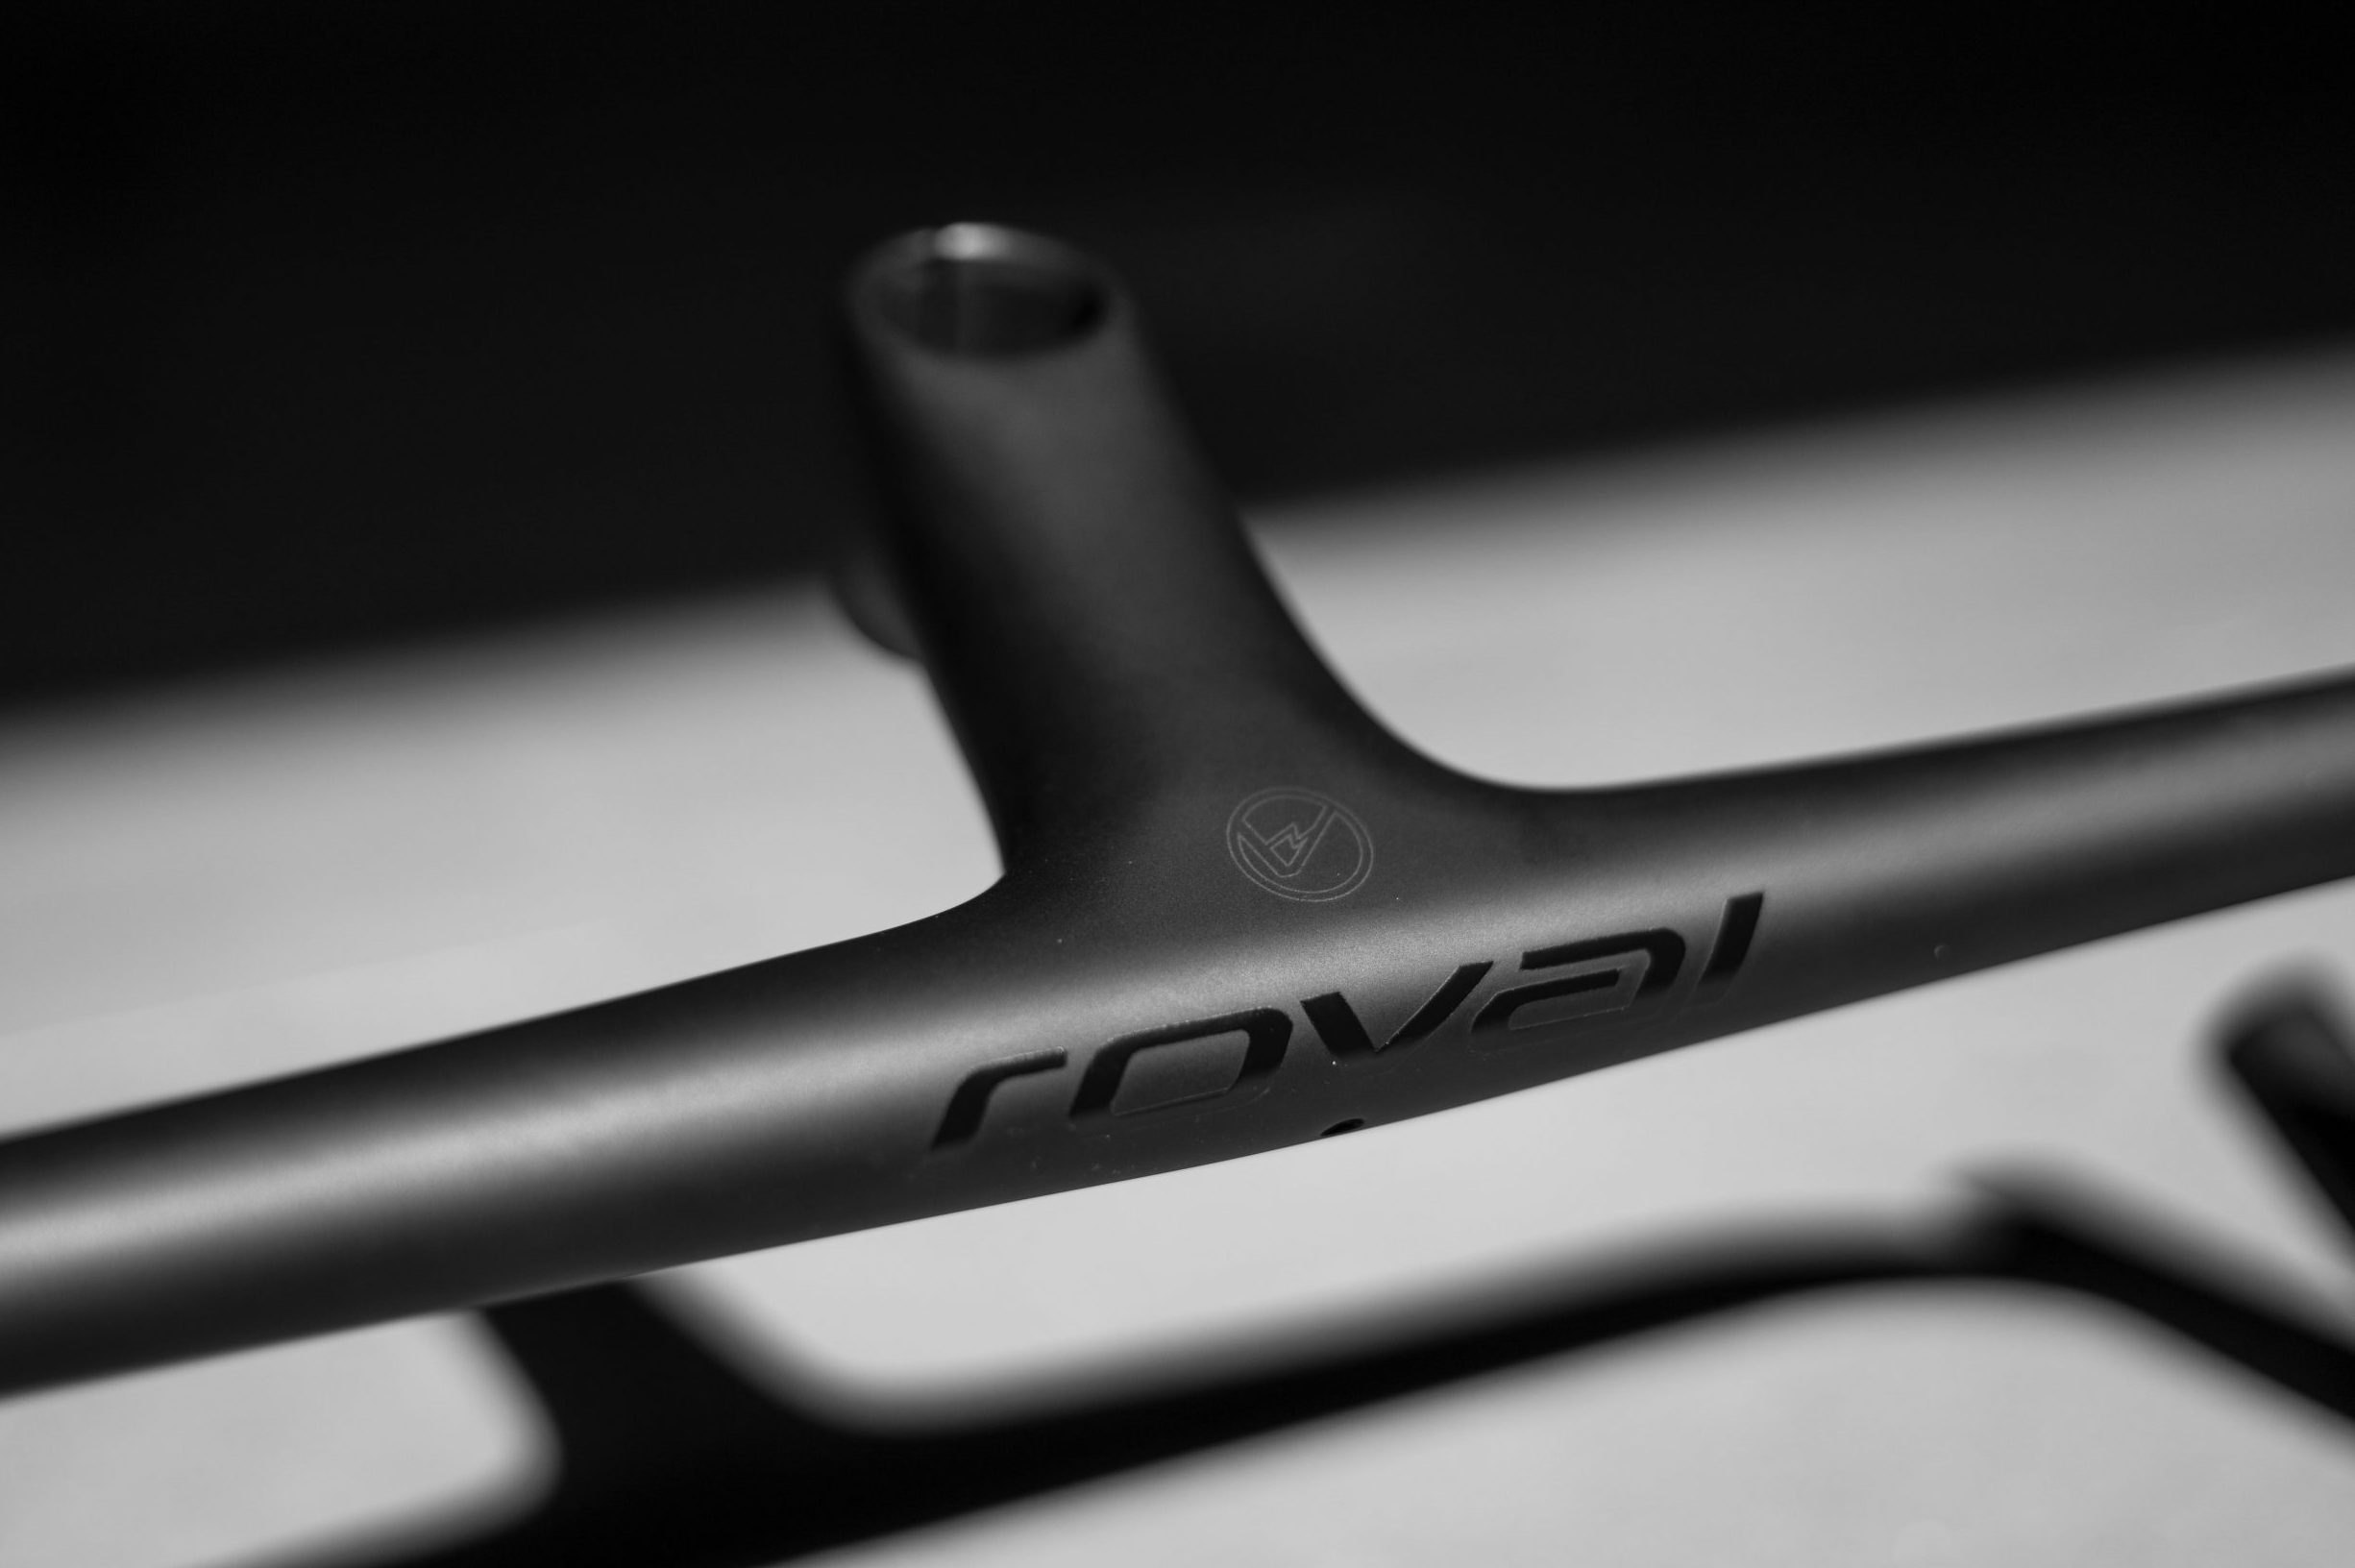 Specialized grows Roval Alpinist range with cockpit and seatpost